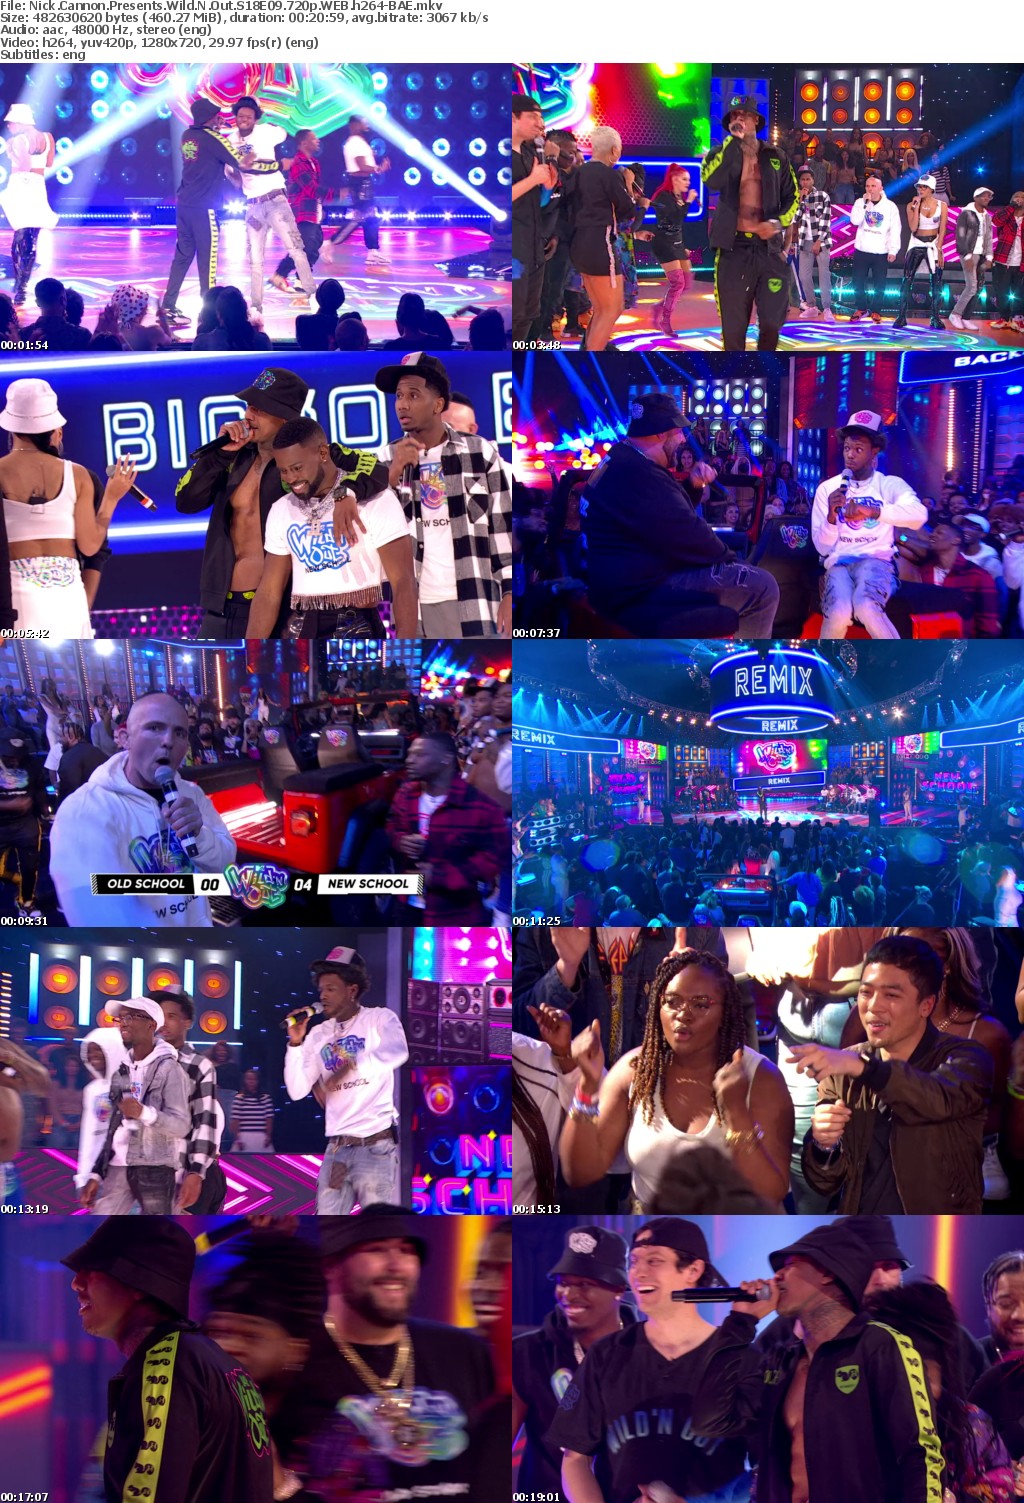 Nick Cannon Presents Wild N Out S18E09 720p WEB h264-BAE